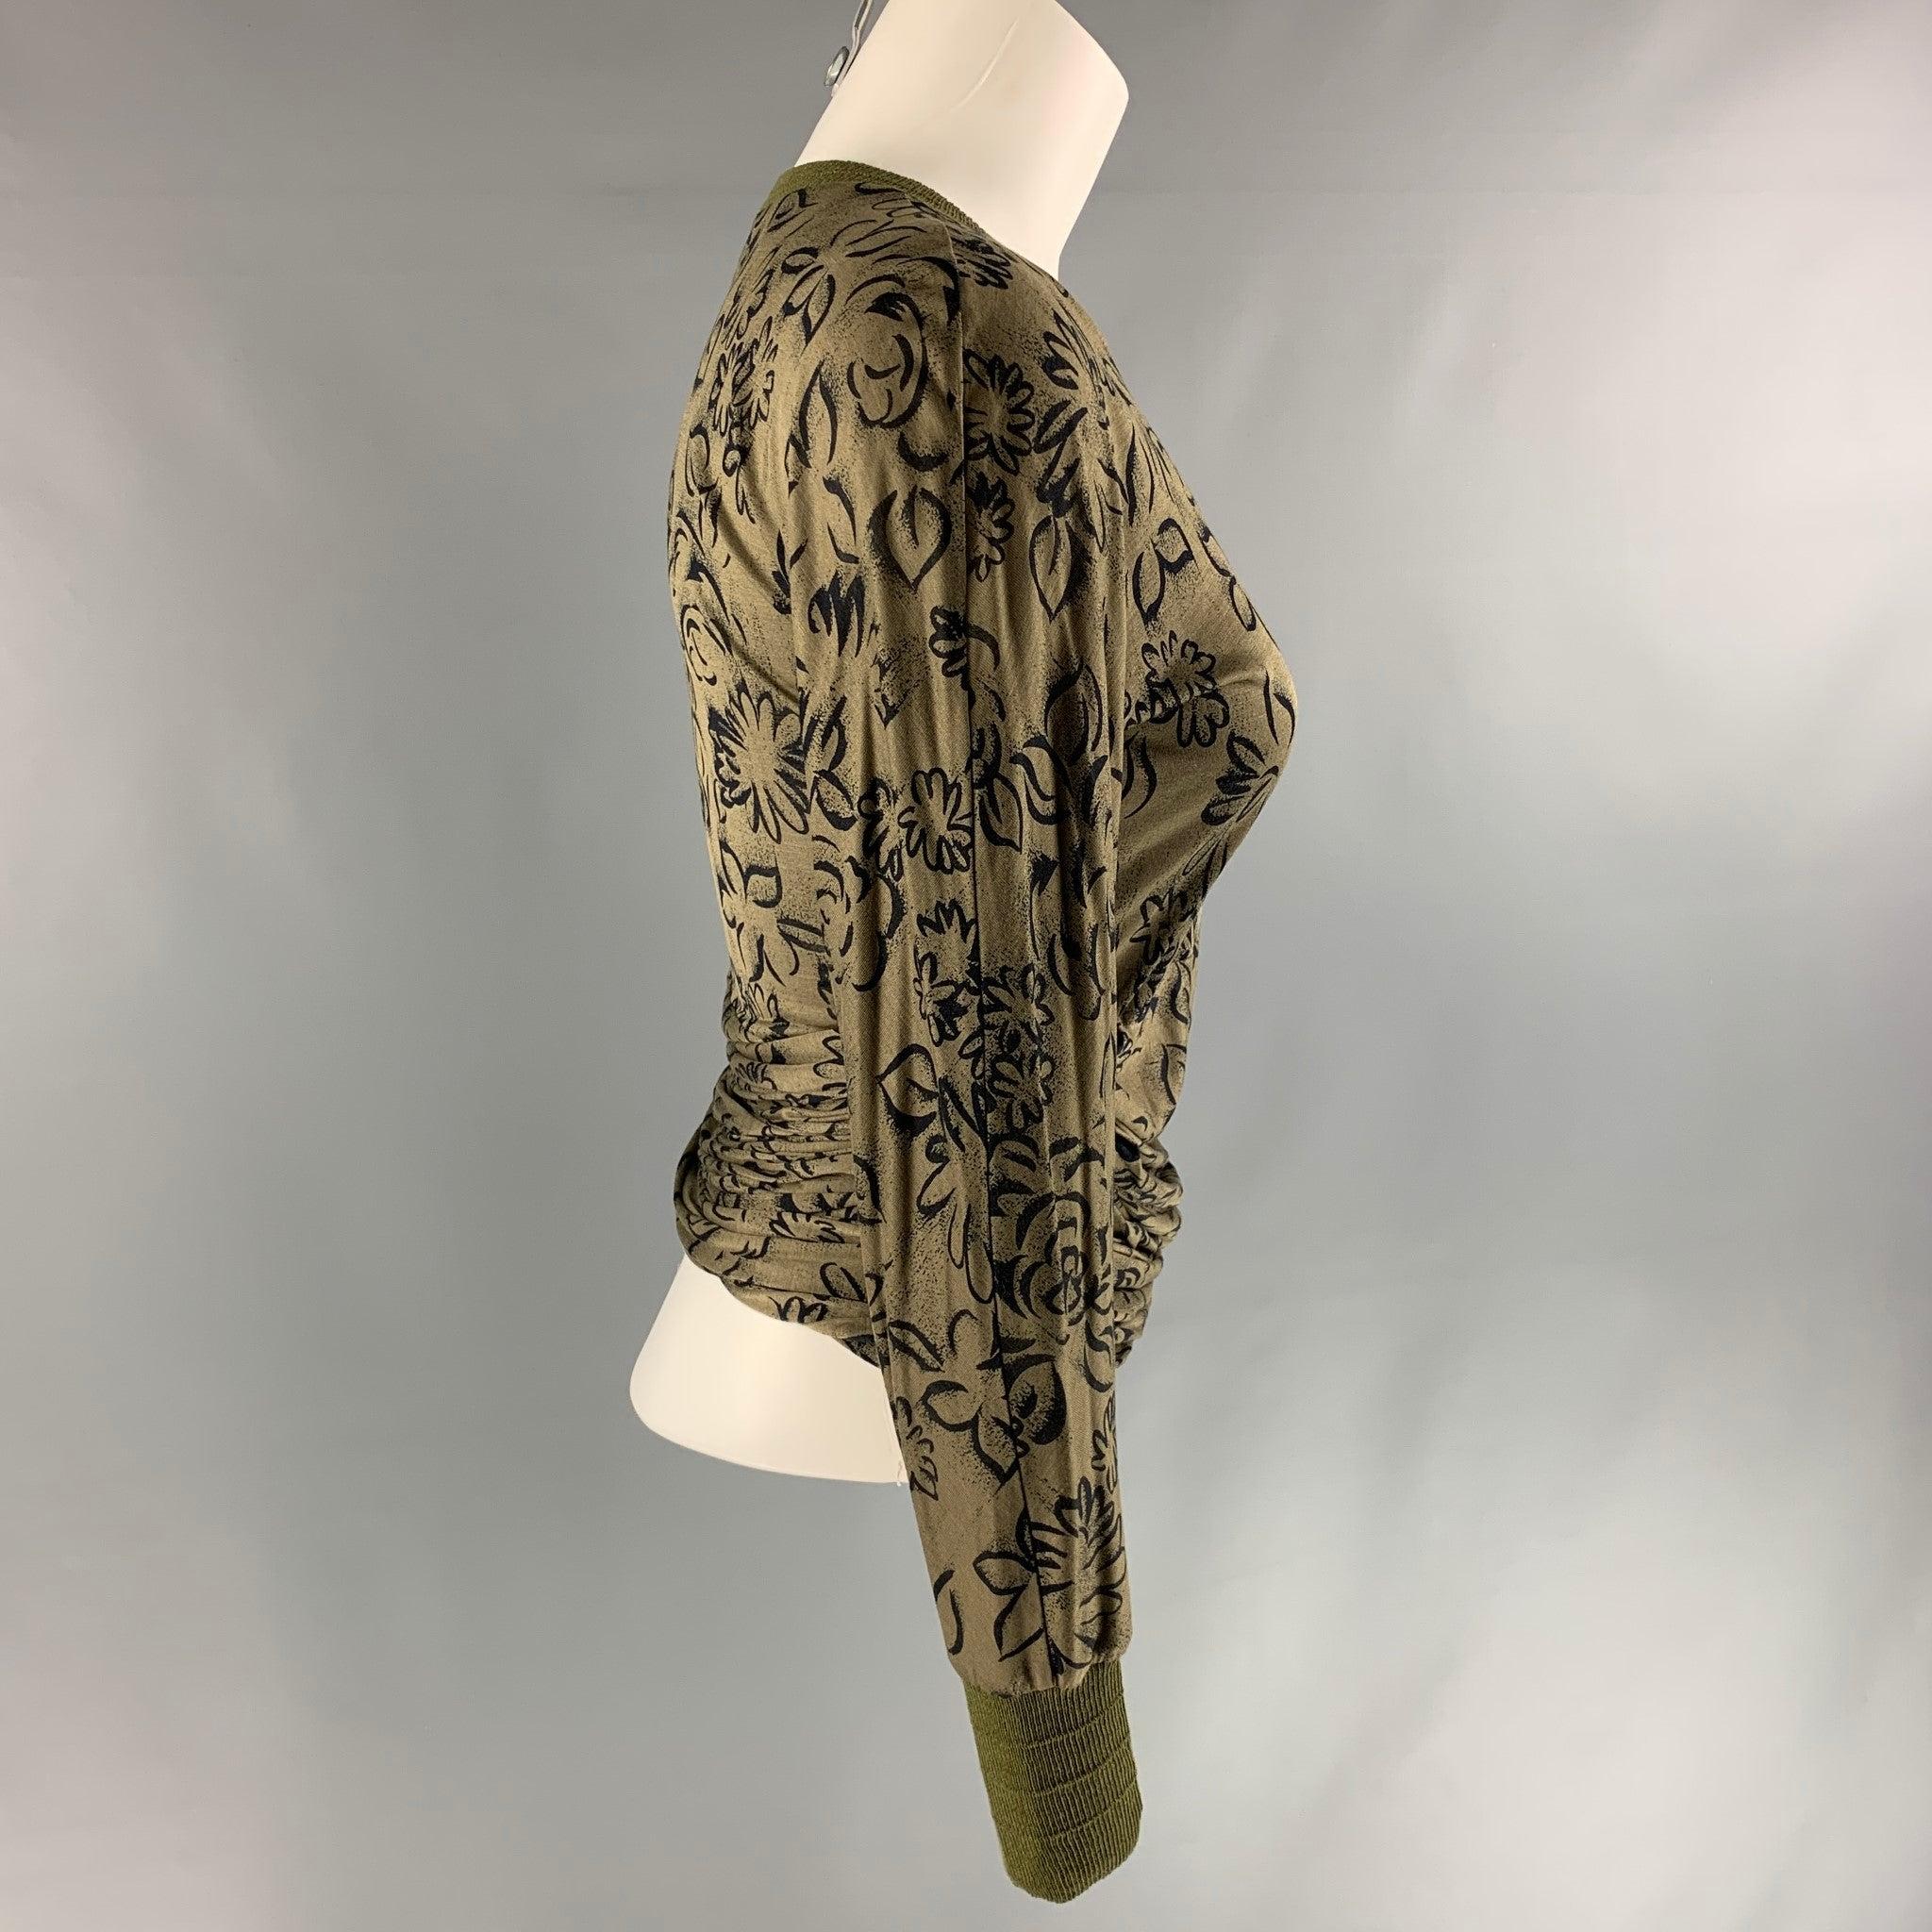 VINTAGE GIANNI VERSACE pullover comes in a green and black floral print viscose and silk jersey featuring draped detail at the bottom. Made in Italy.Excellent Pre-Owned Condition.  

Marked:   I 

Measurements: 
 
Shoulder: 14 inches Bust: 36 inches